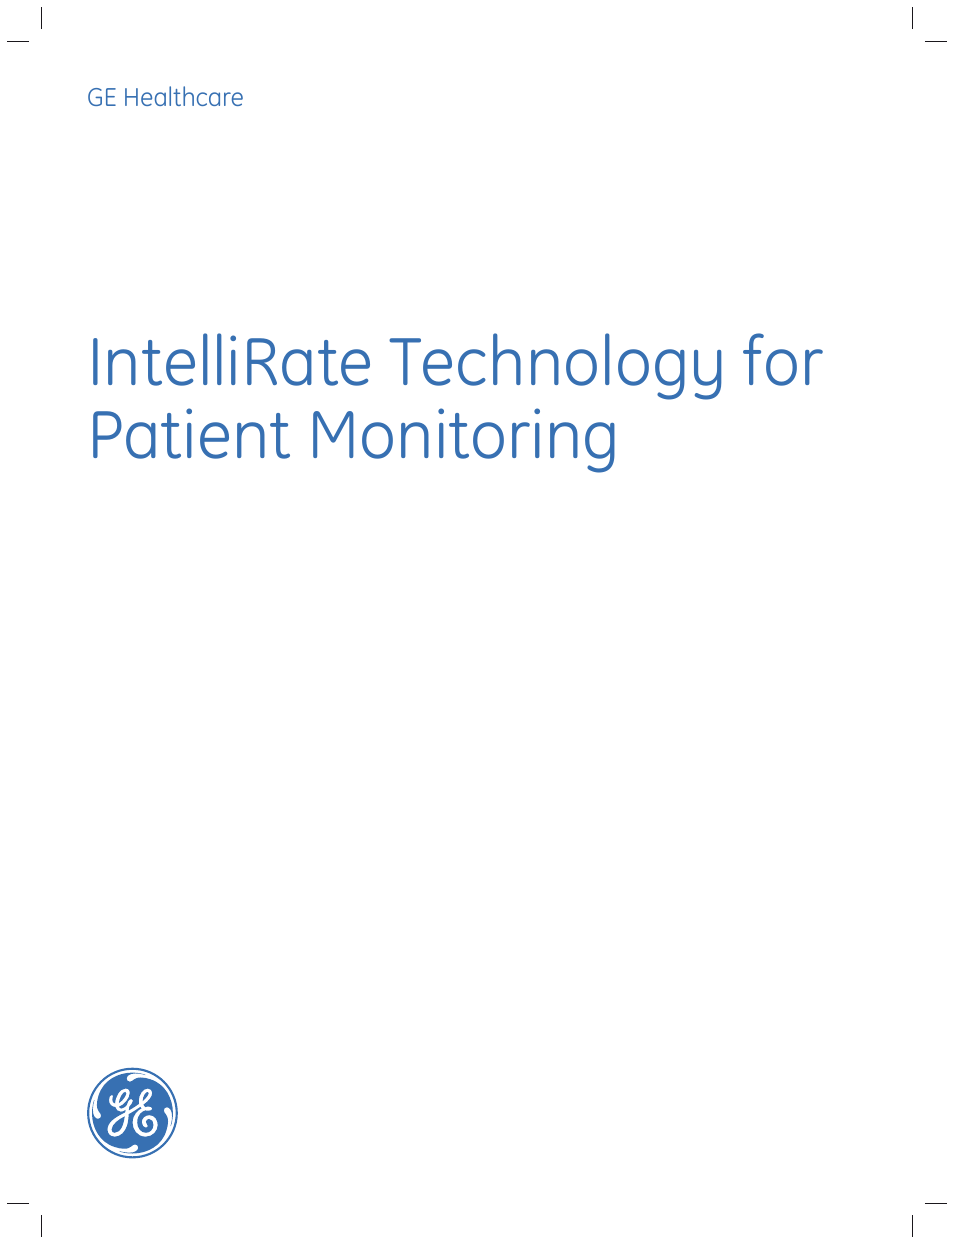 IntelliRate Technology for Patient Monitoring